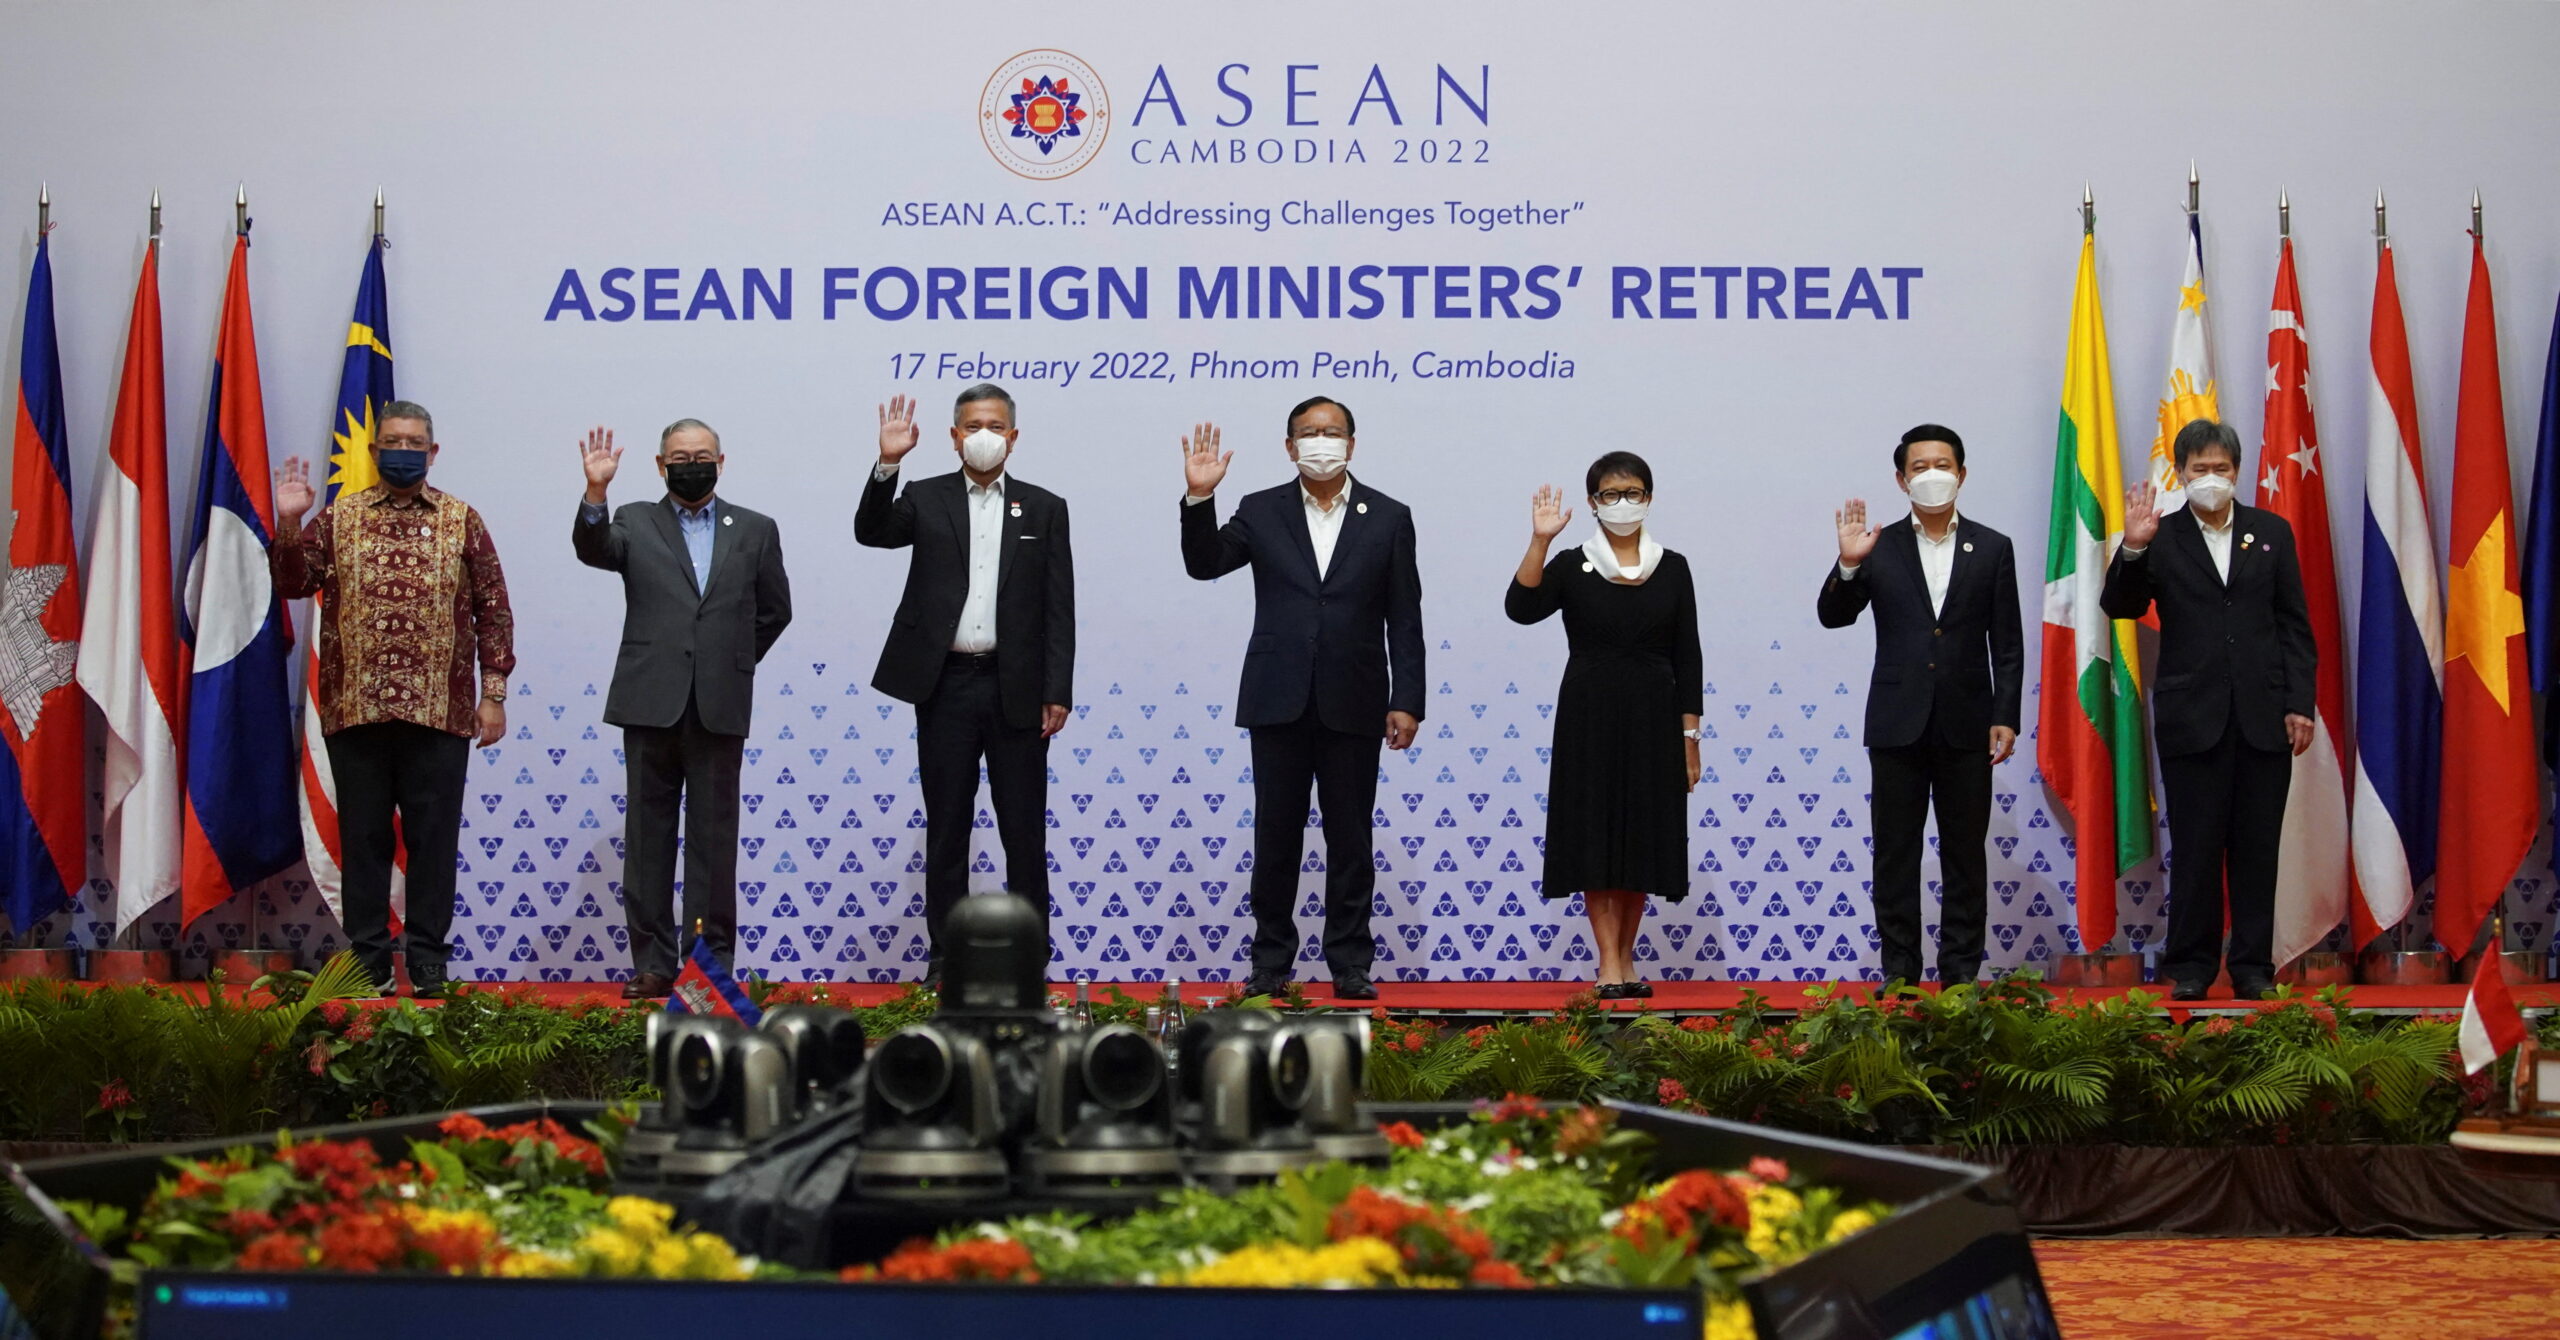 Not a Pawn: Southeast Asia in a World of Rising Great Power Tensions